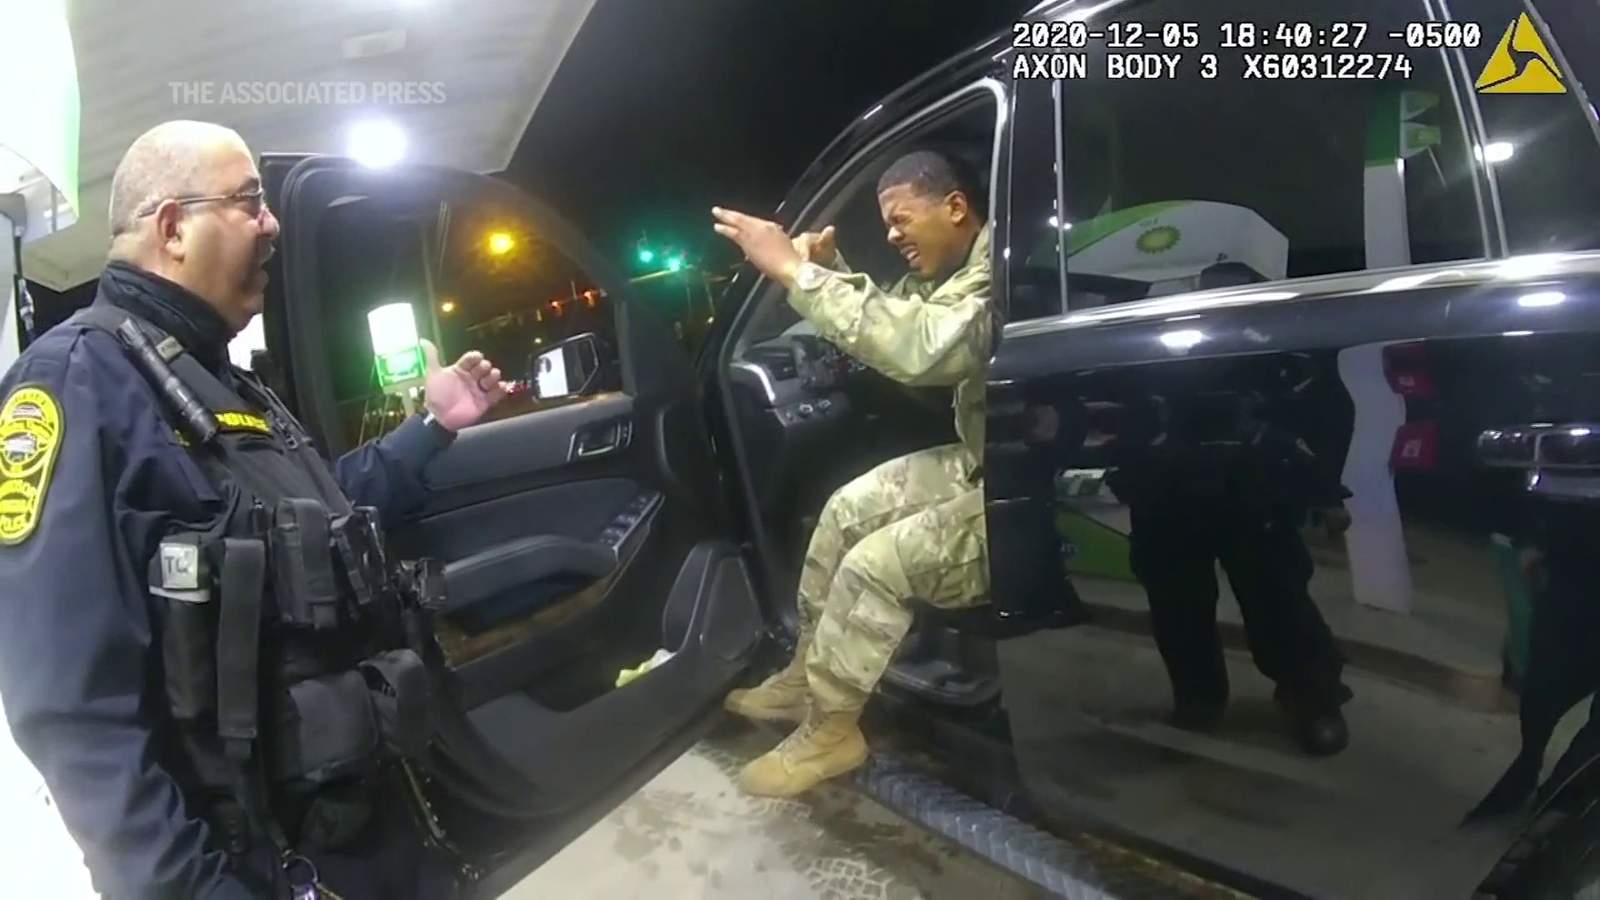 Officer accused of force in stop of Black Army officer fired